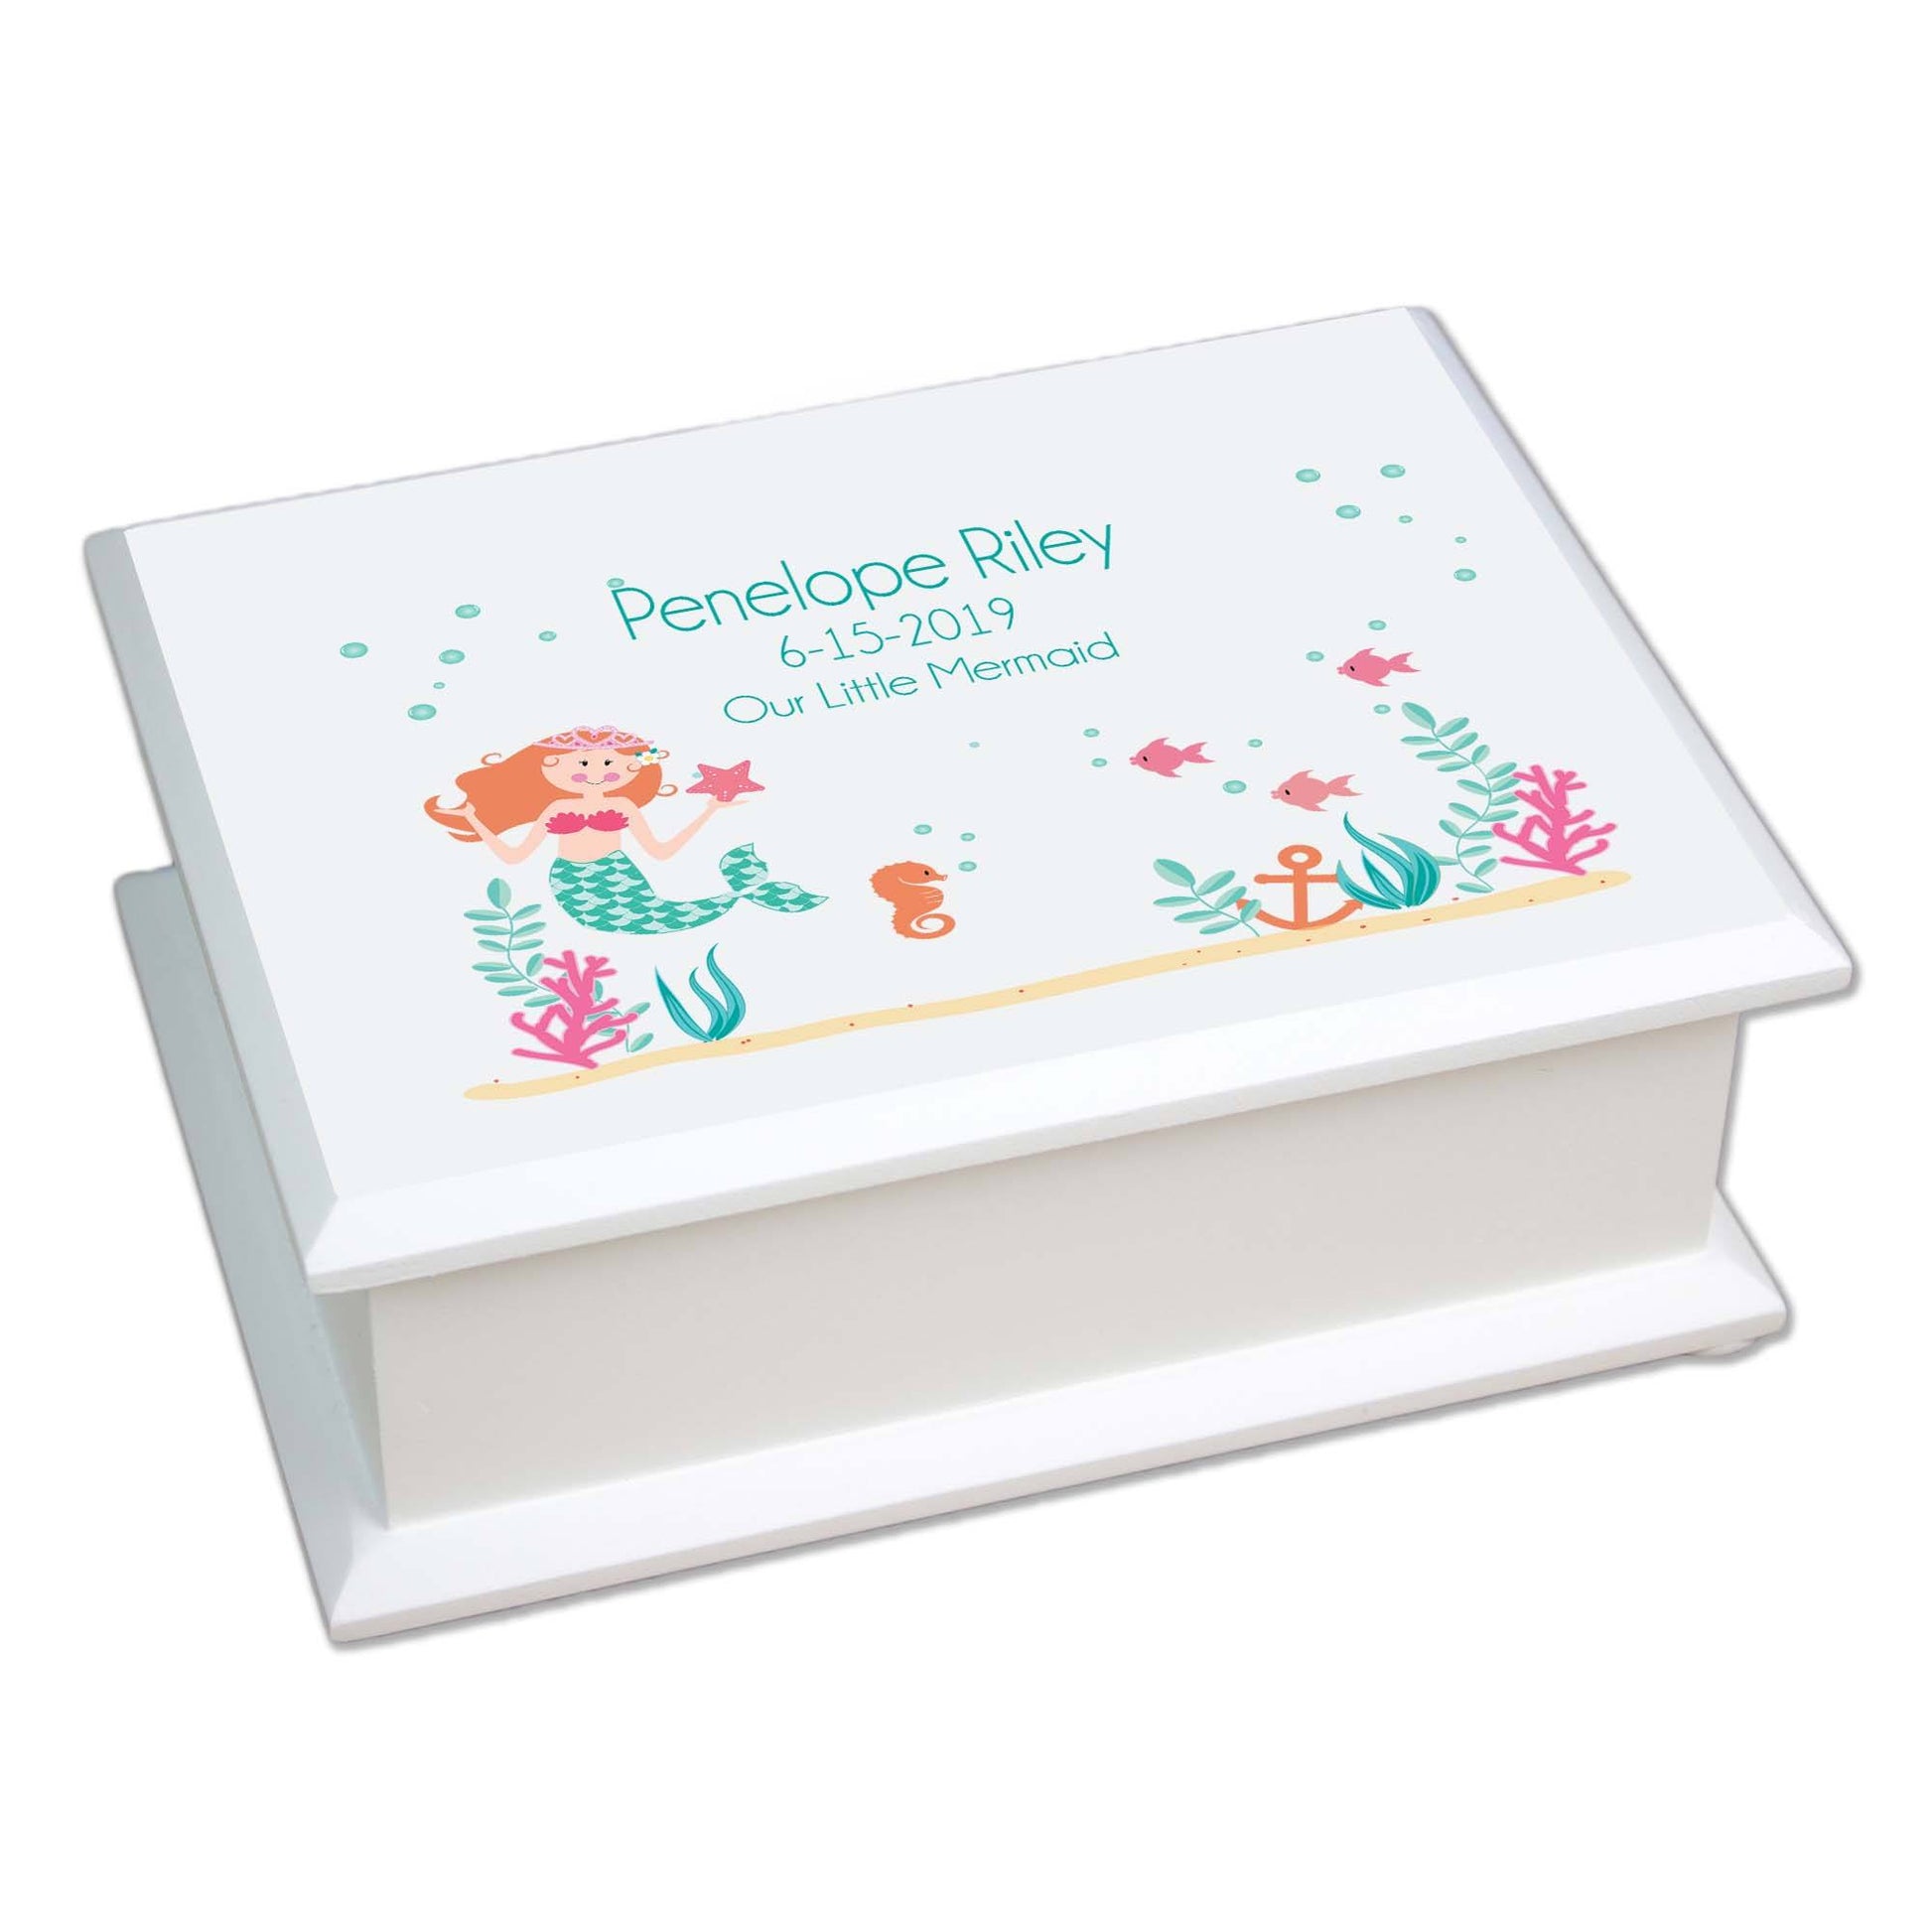 Personalized Lift Top Jewelry Box with Mermaid Princess design